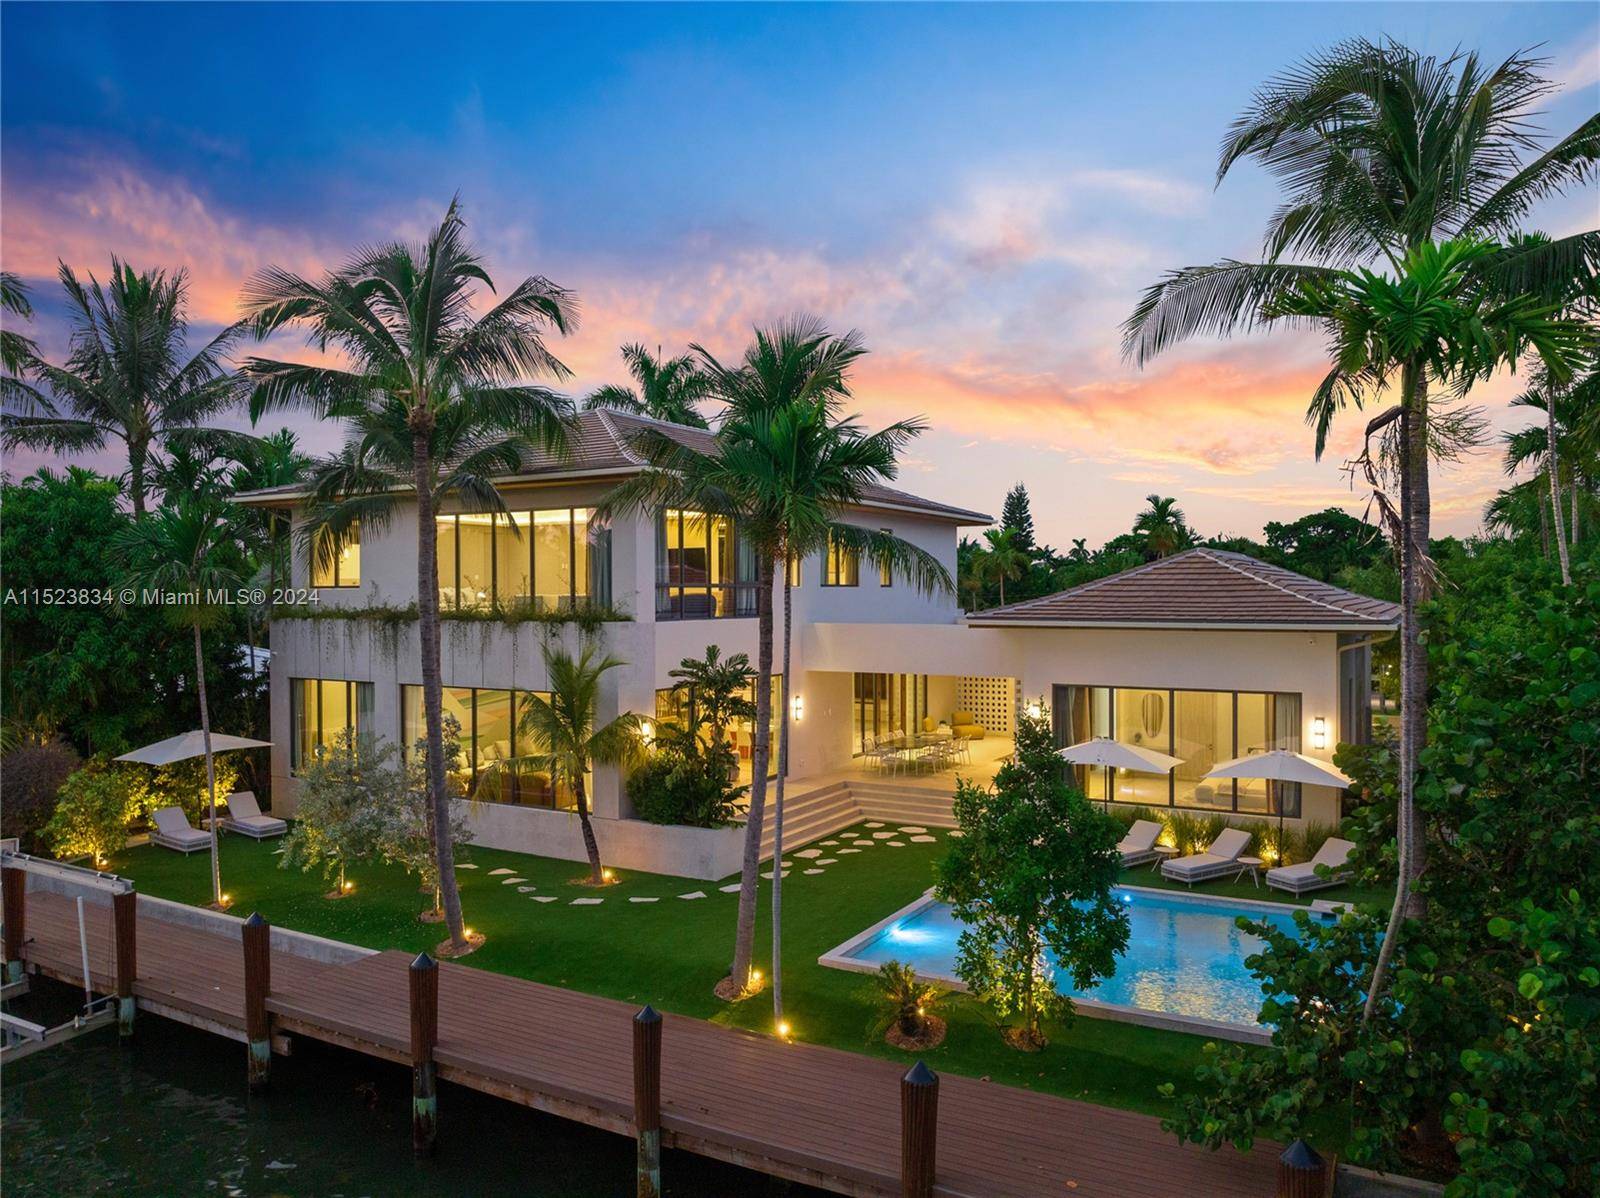 Brand new construction completed in 2023, this waterfront home has been meticulously designed and furnished for the most discerning buyer.